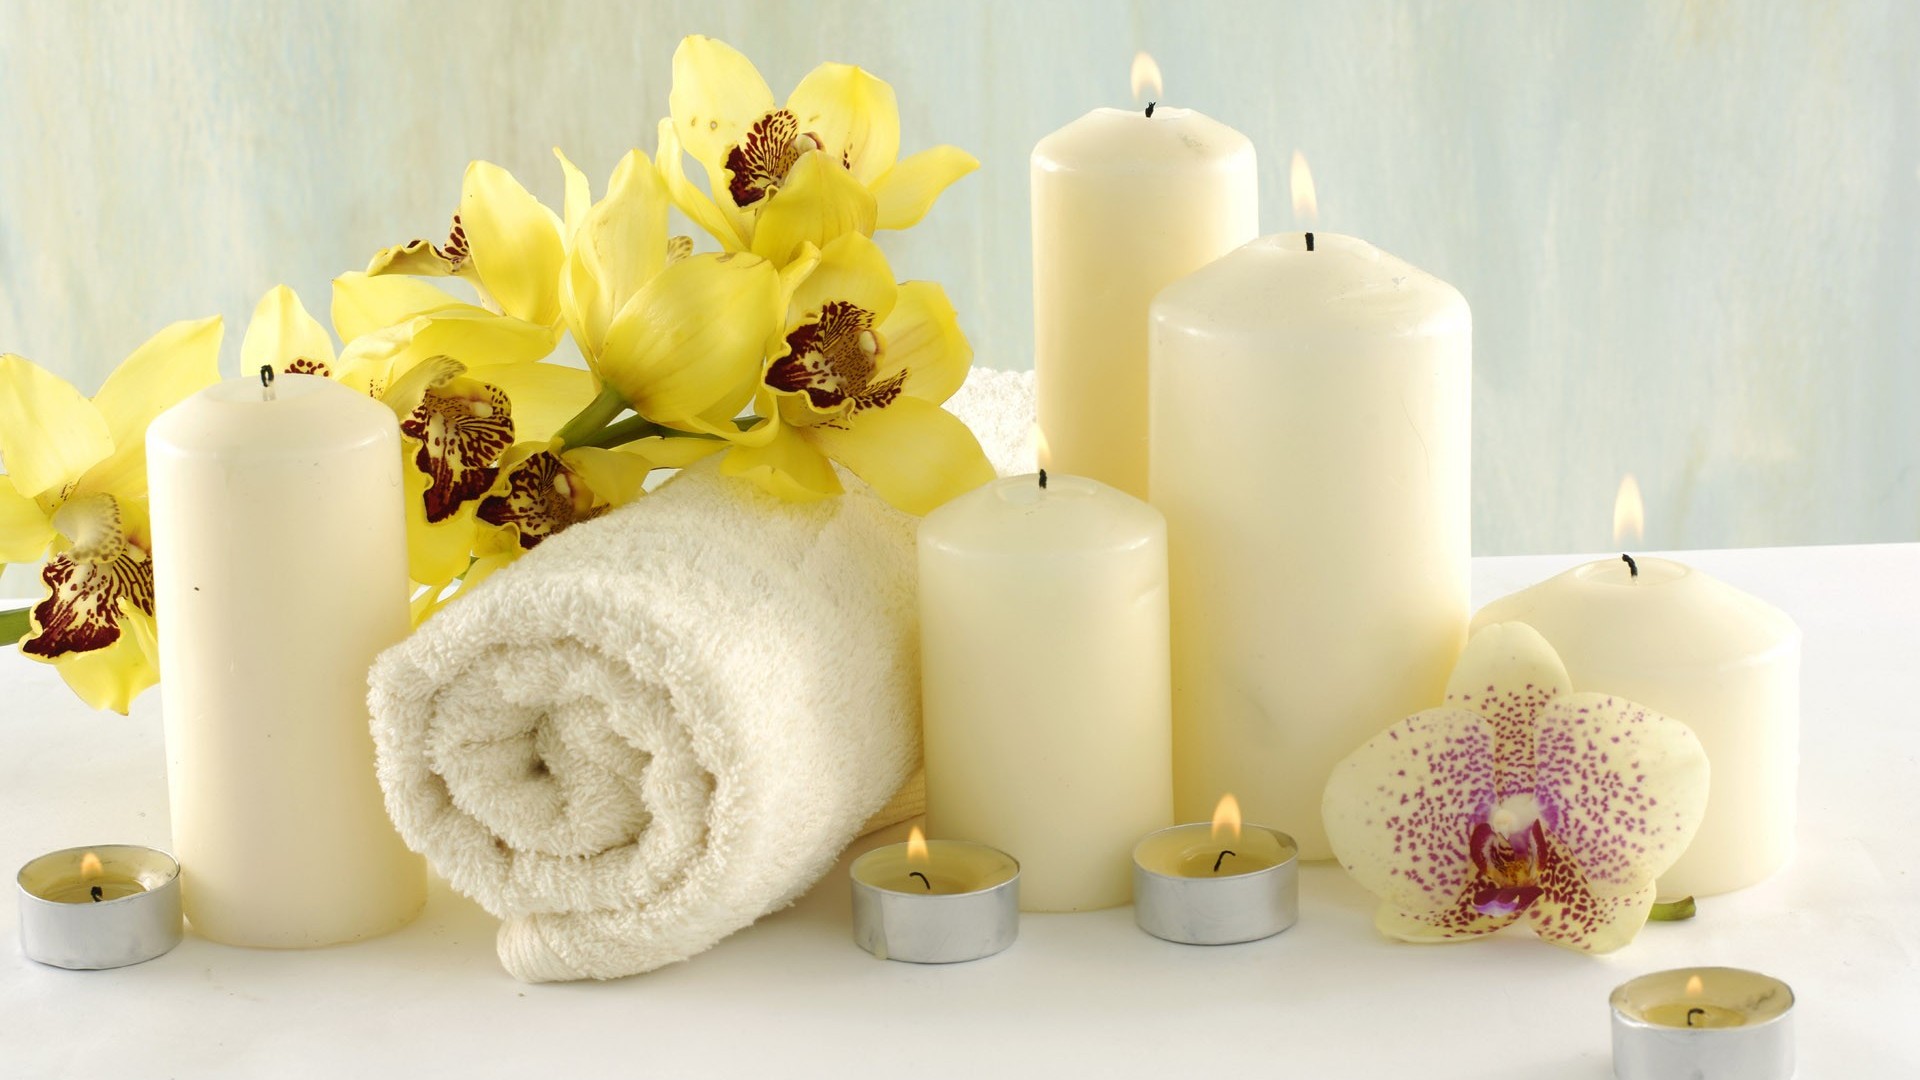 Candle Flower Orchid Spa Still Life Towel 1920x1080